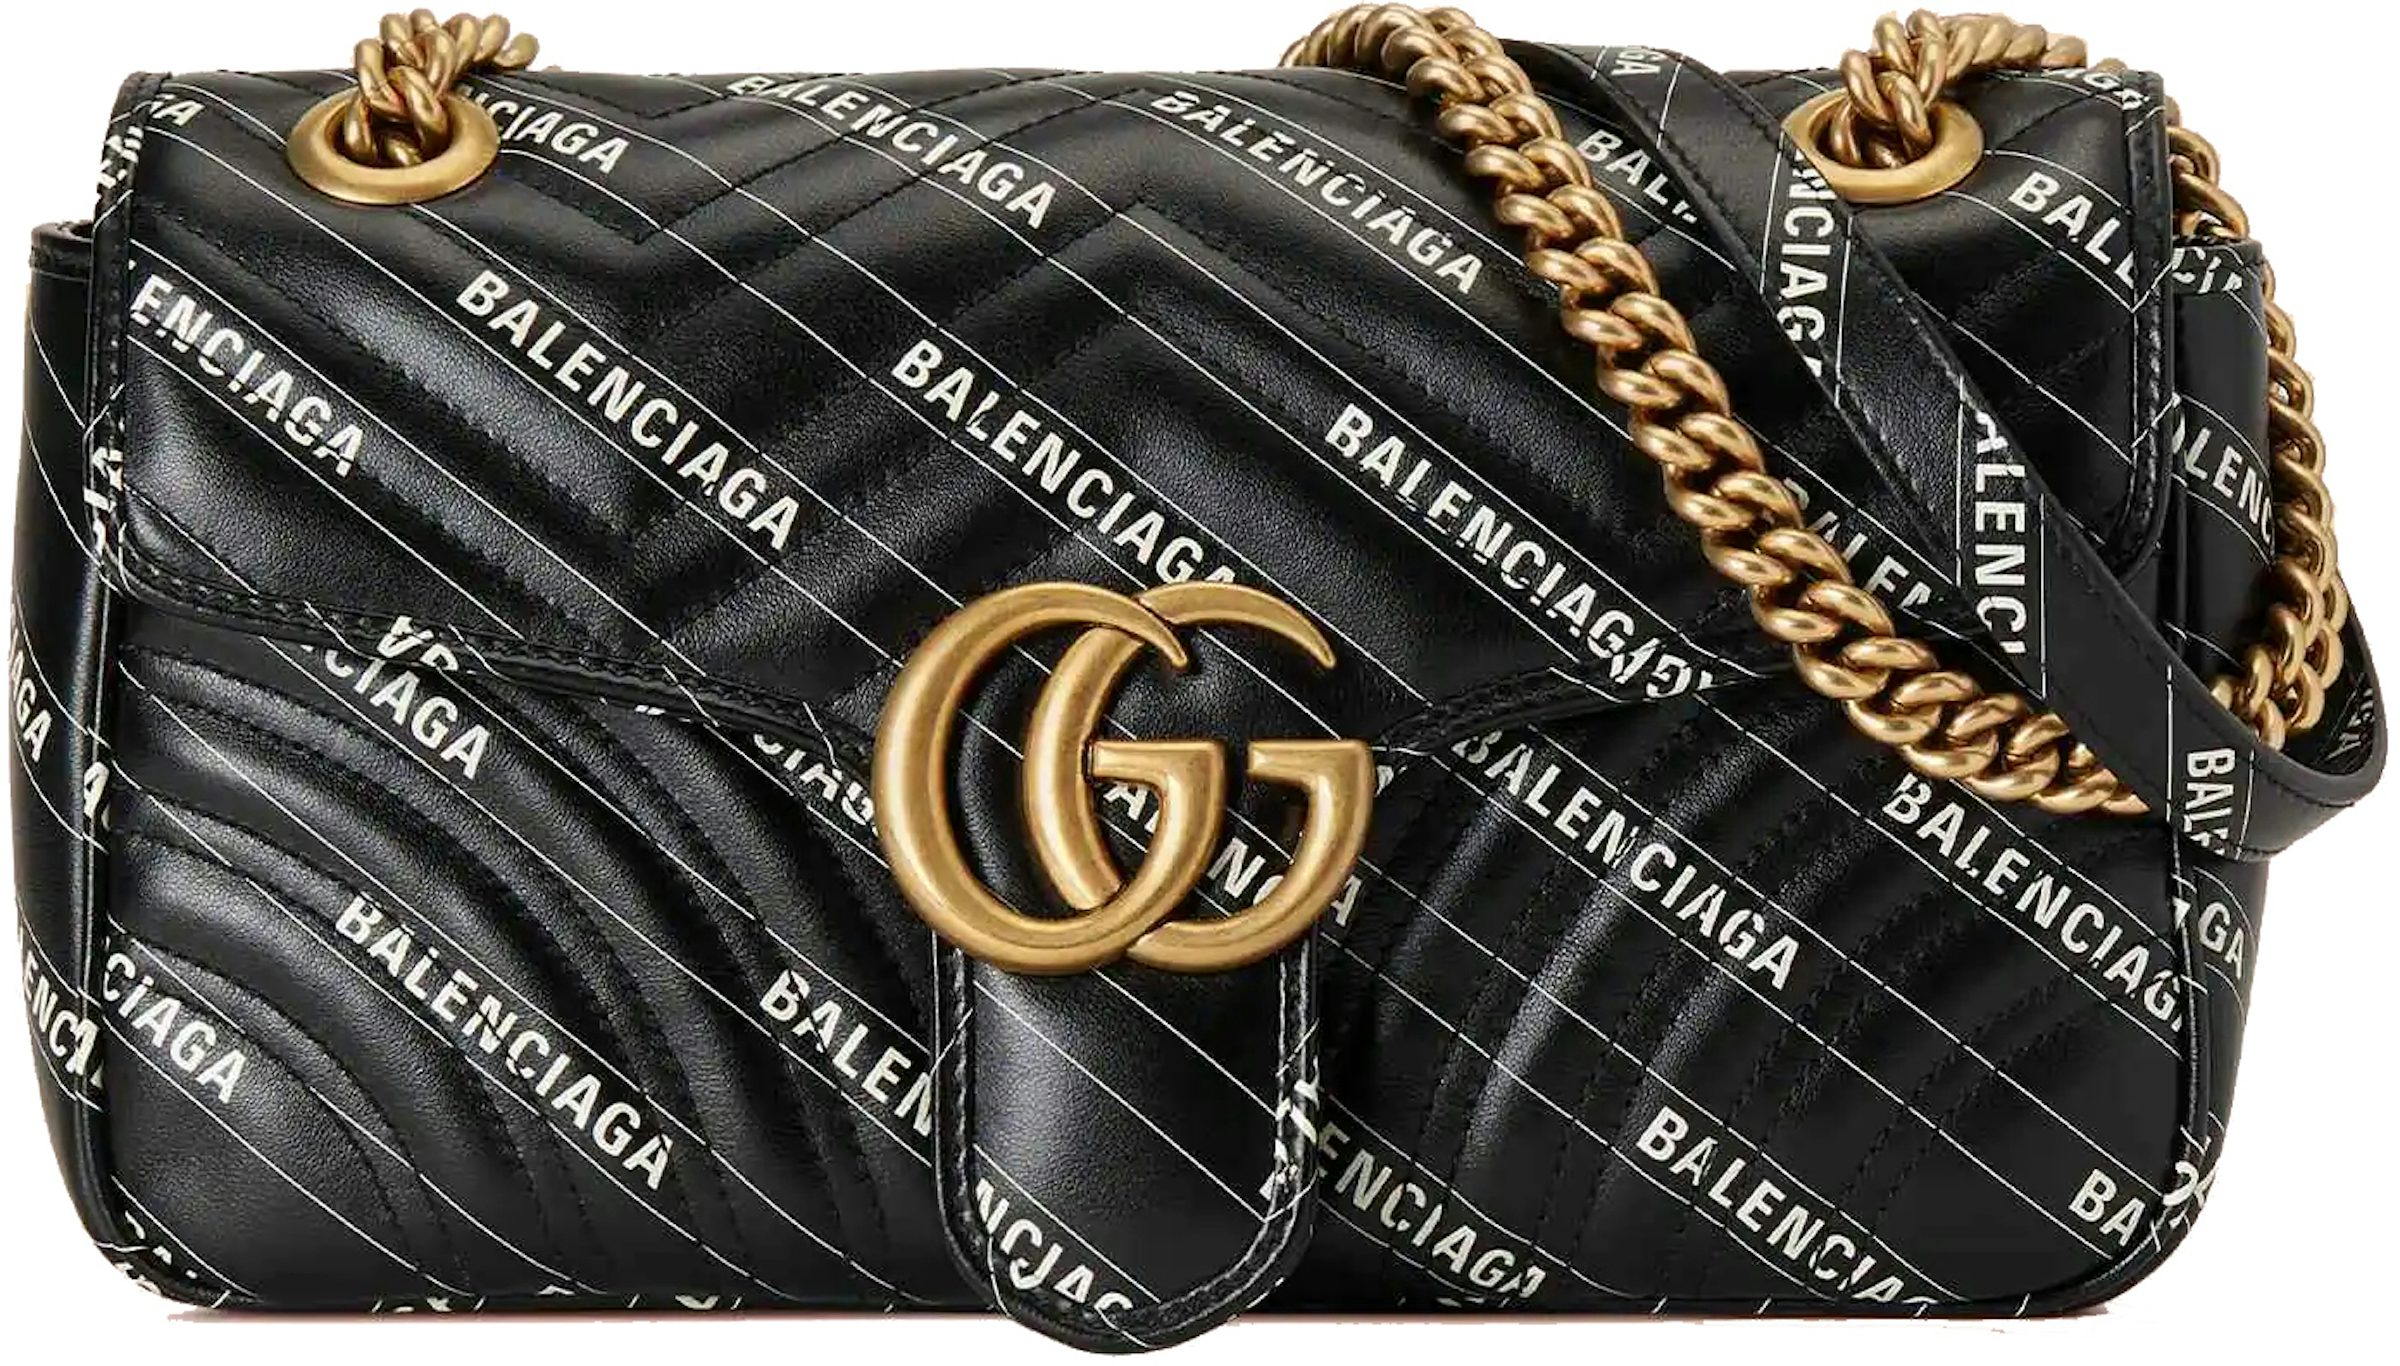 AUTHENTICATE A GUCCI HANDBAG IN 4 STEPS! / Is your Gucci handbag